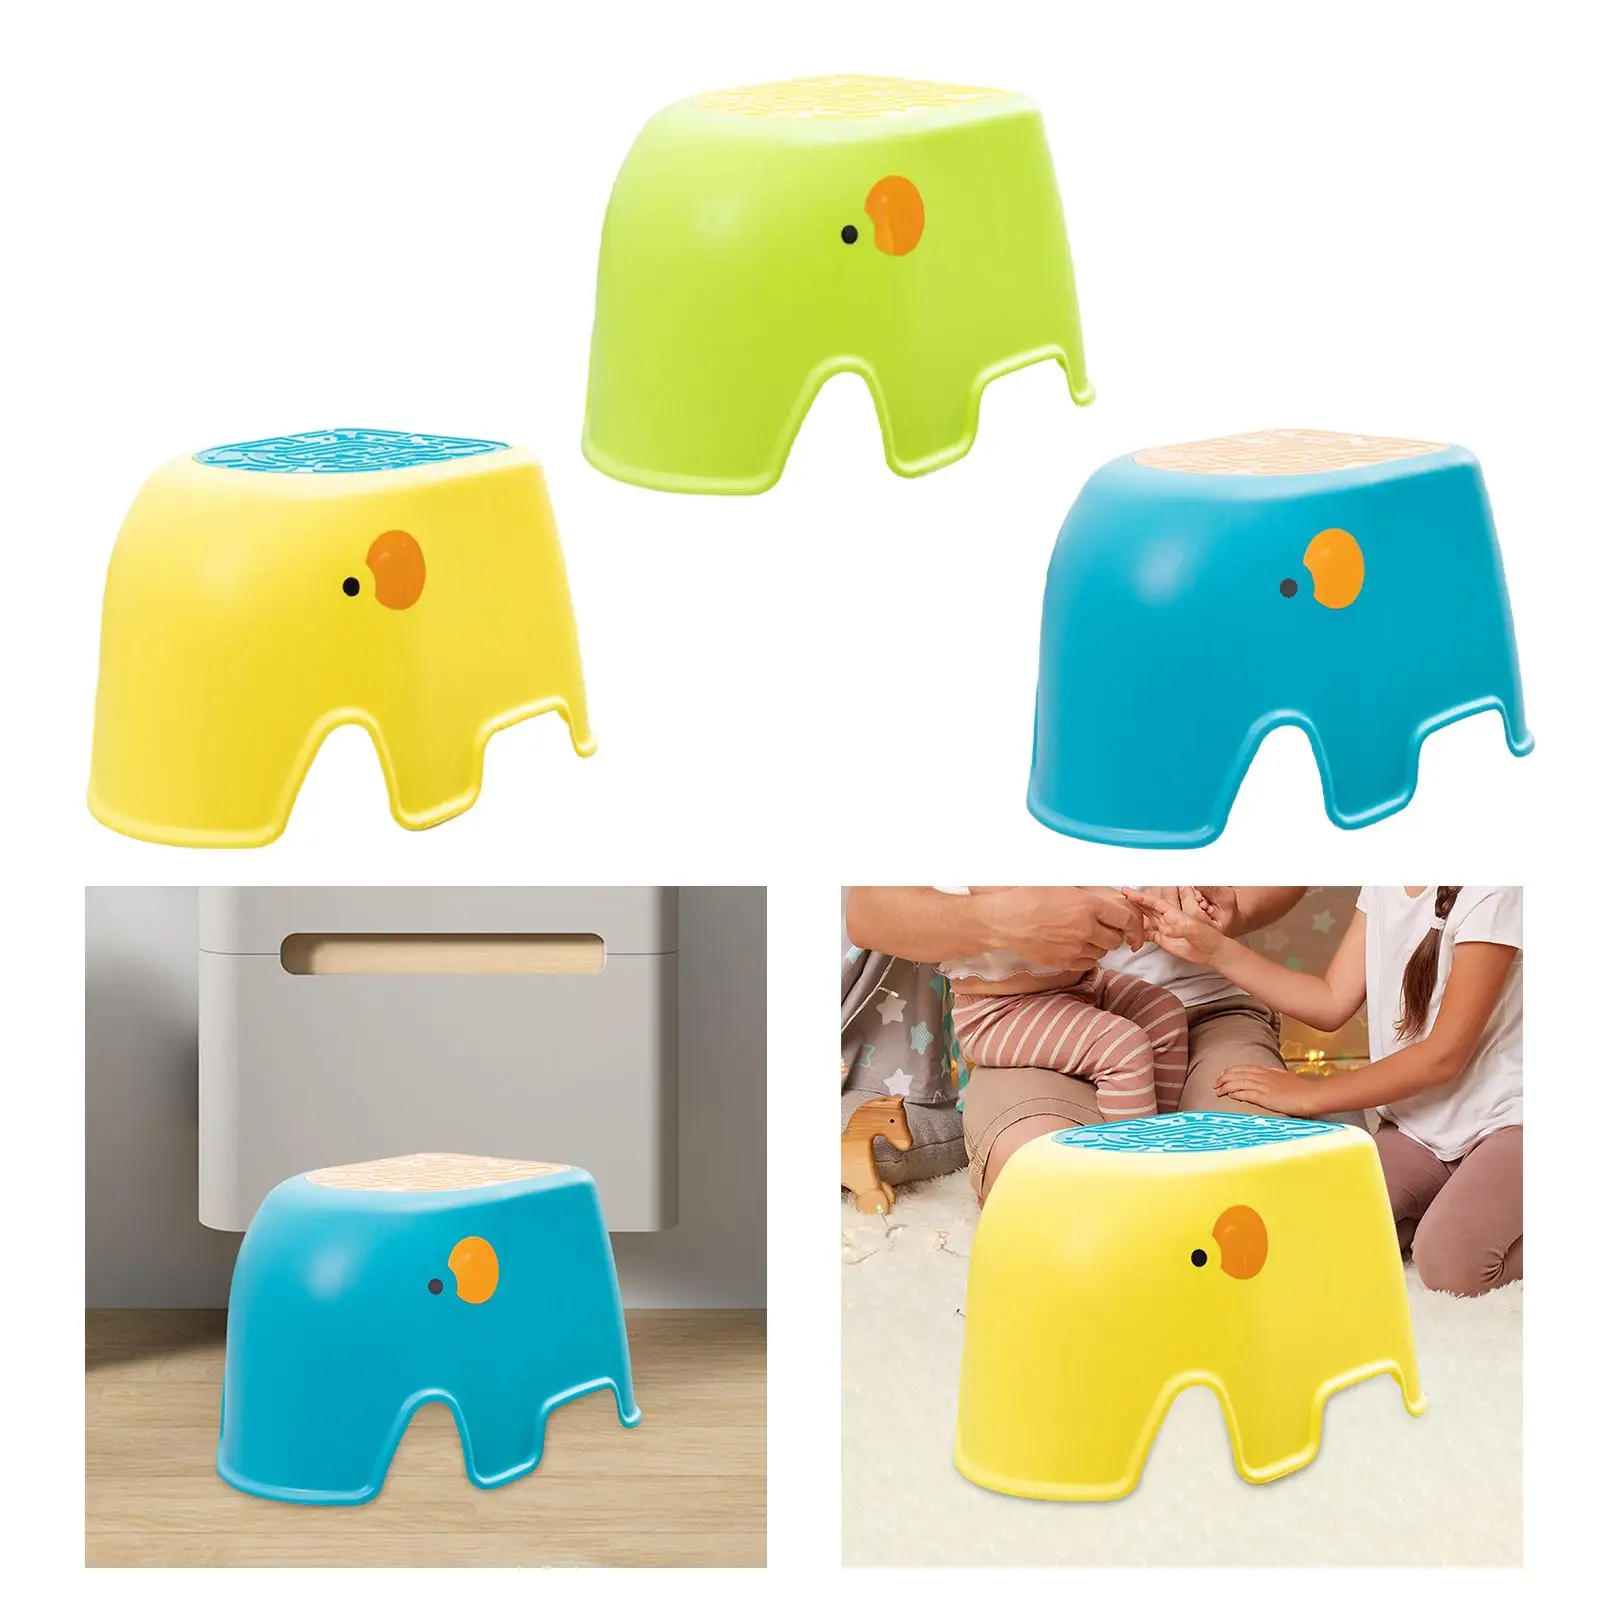 Step Stool for Kids Wide Step Sturdy Stable Poop Stools Bathroom Step Stool for Bathroom Toilet Potty Training Kitchen Bedroom